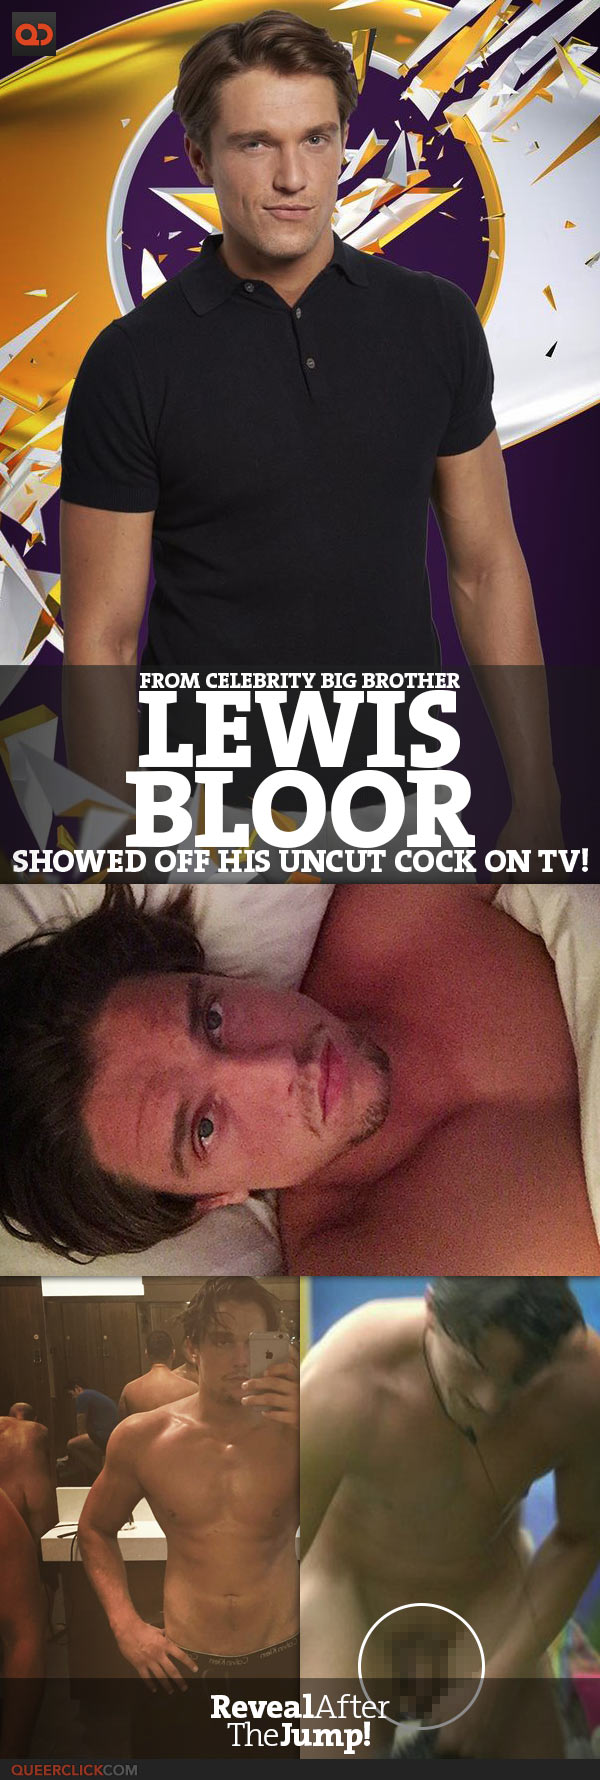 Lewis Bloor, From Celebrity Big Brother, Showed Off His Uncut Cock On Tv!